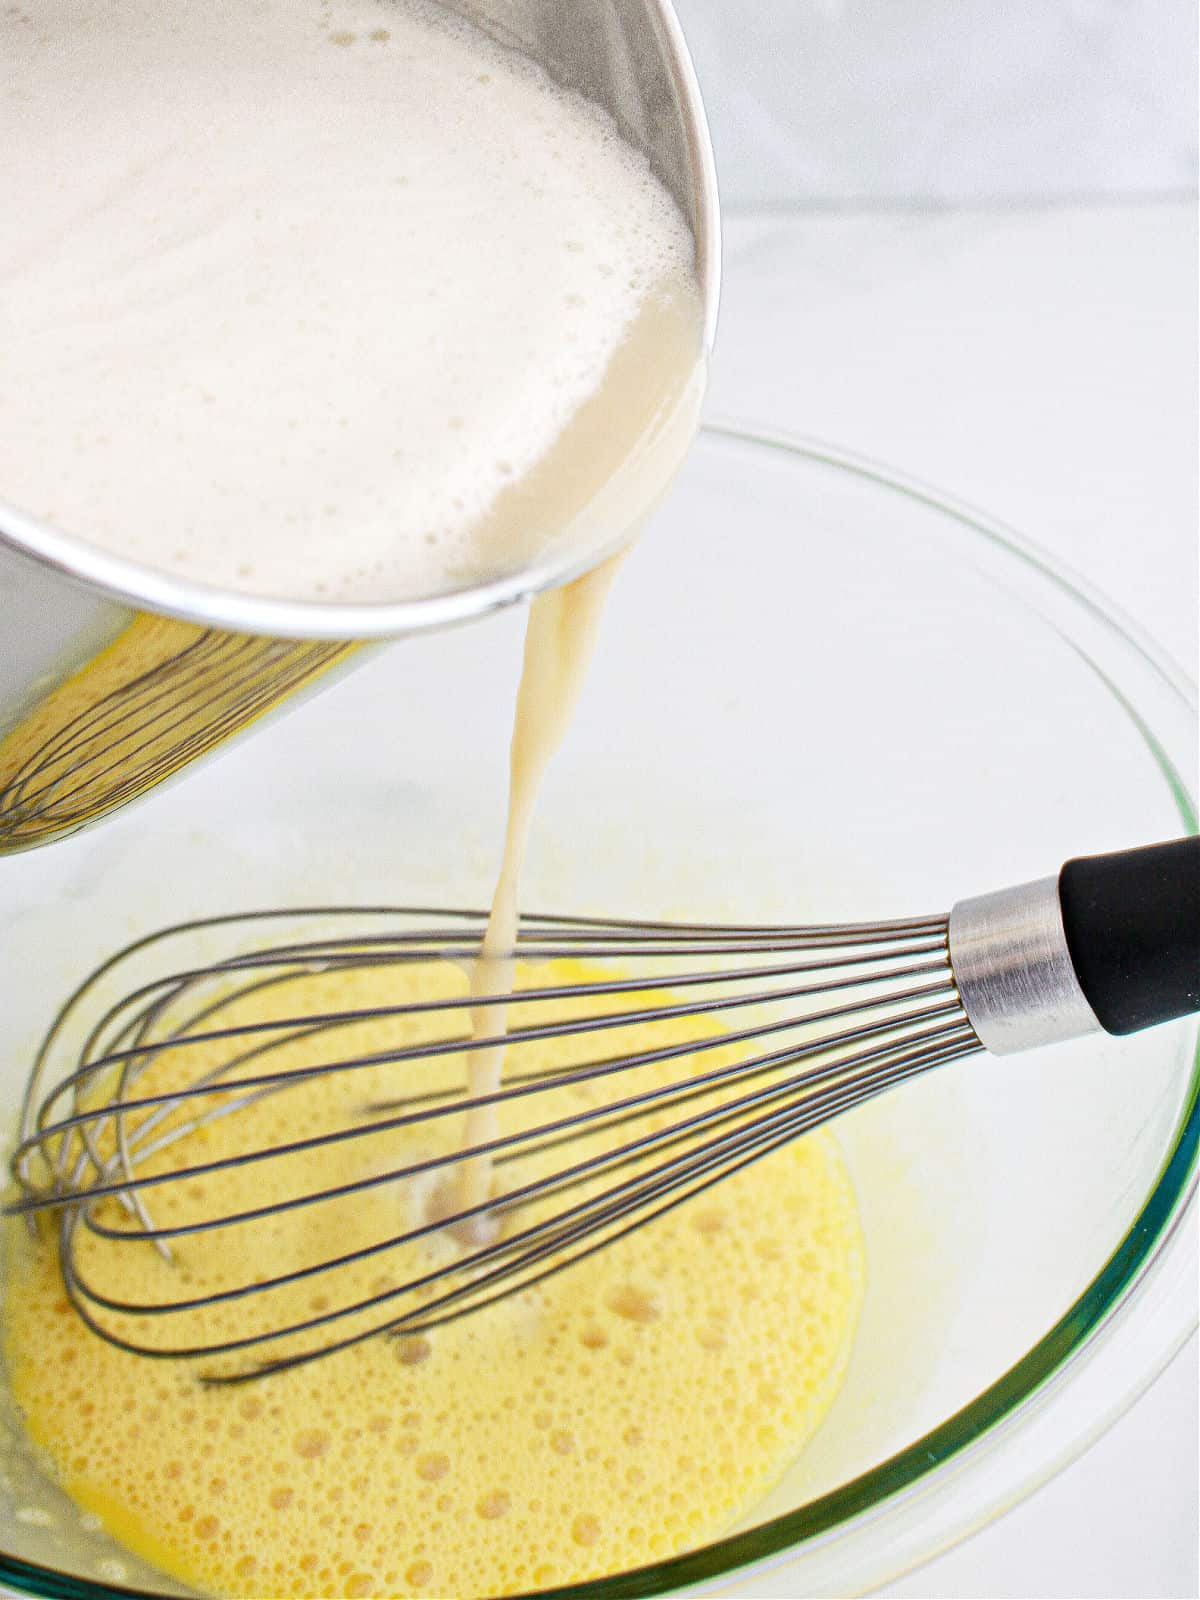 Pouring milk into beaten egg yolks in a glass bowl, a whisk. White background.